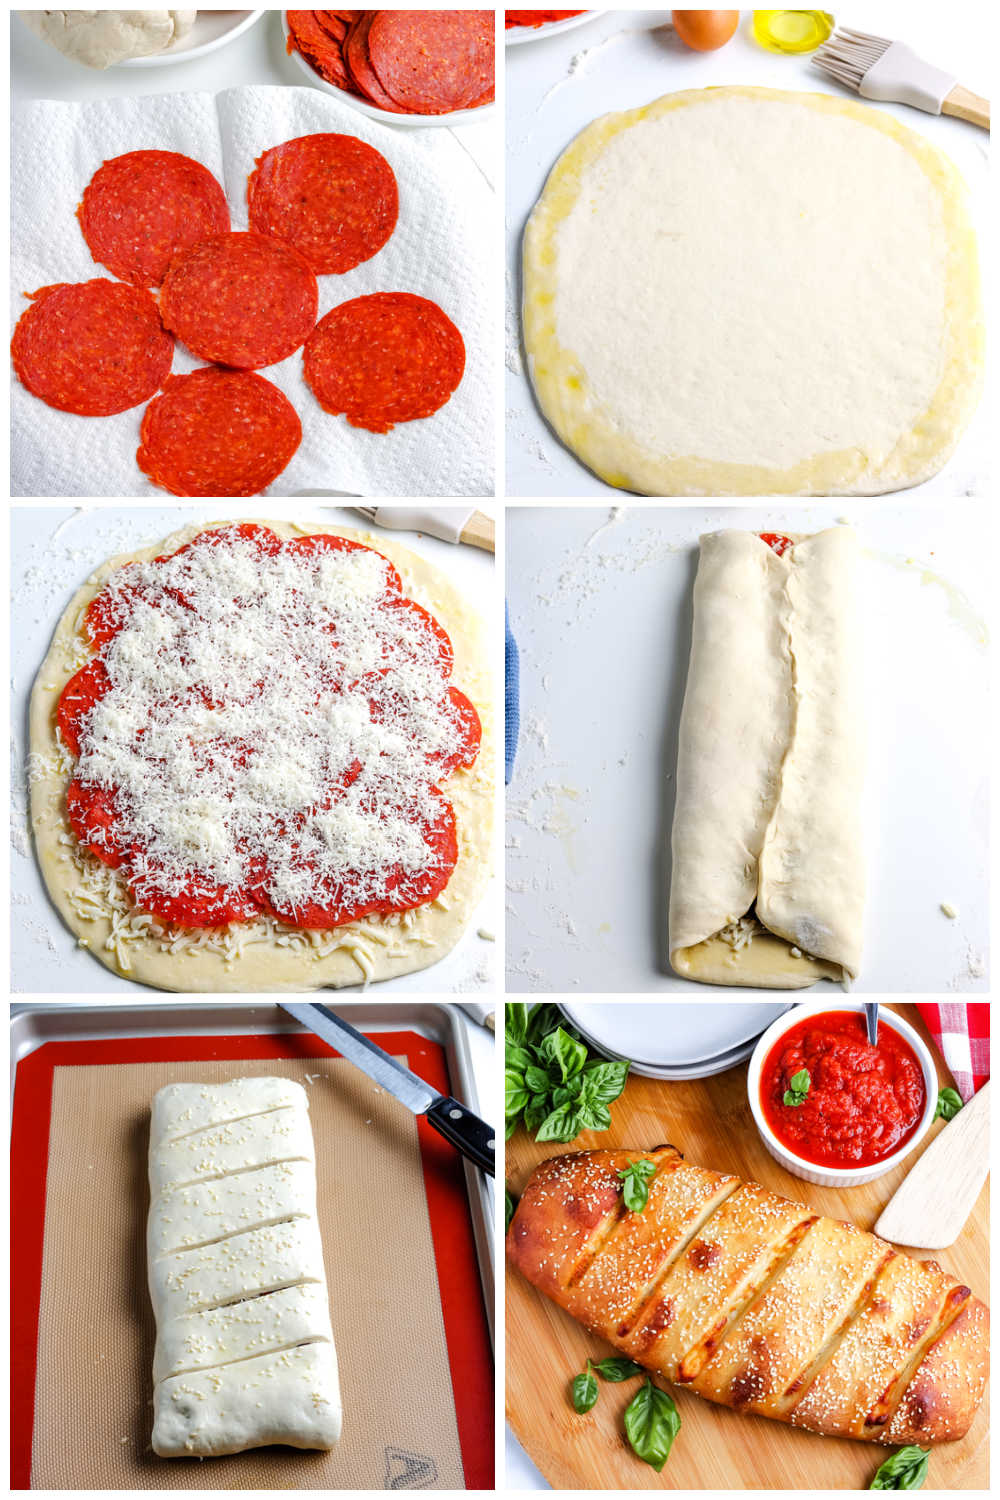 A picture collage showing How to Make Stromboli.